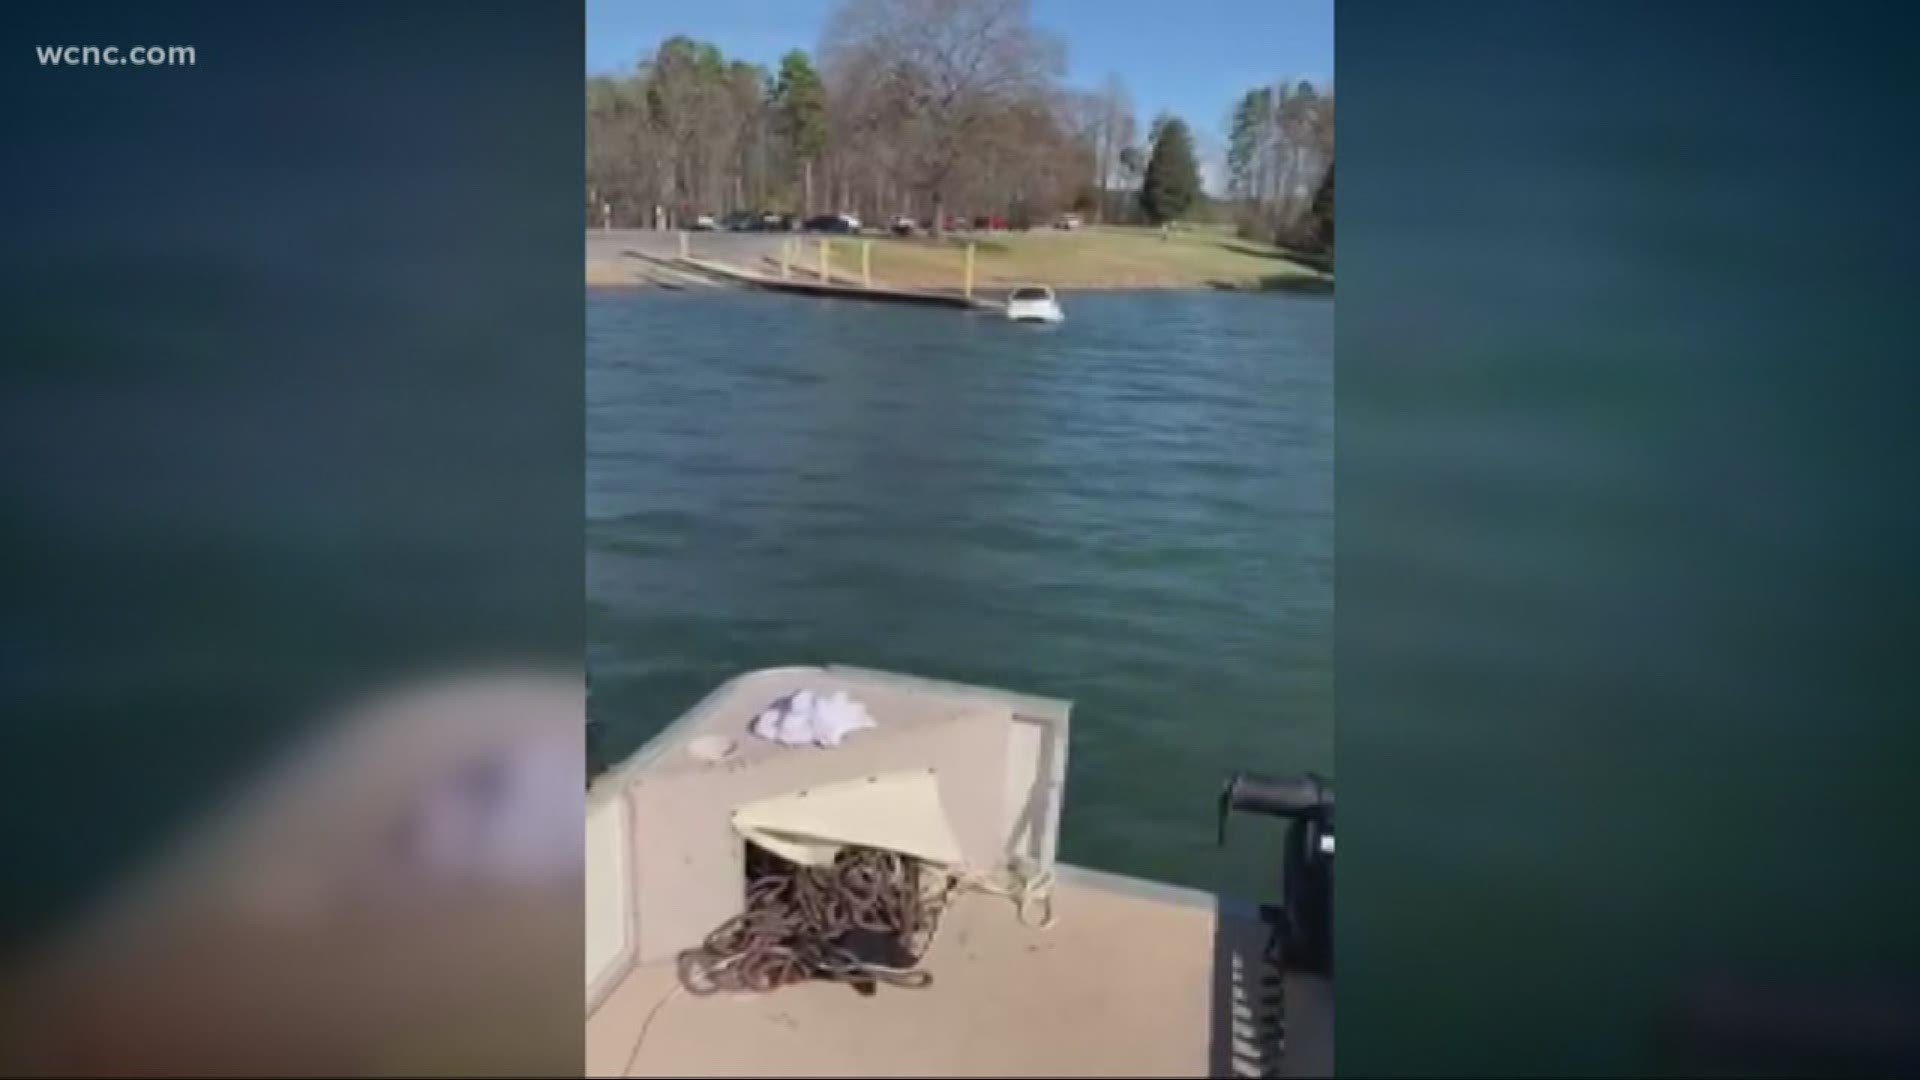 Two cousins out fishing spotted an SUV sinking into the water near Stumpy Creek Boat Landing in Mooresville, so they helped rescue the woman inside.